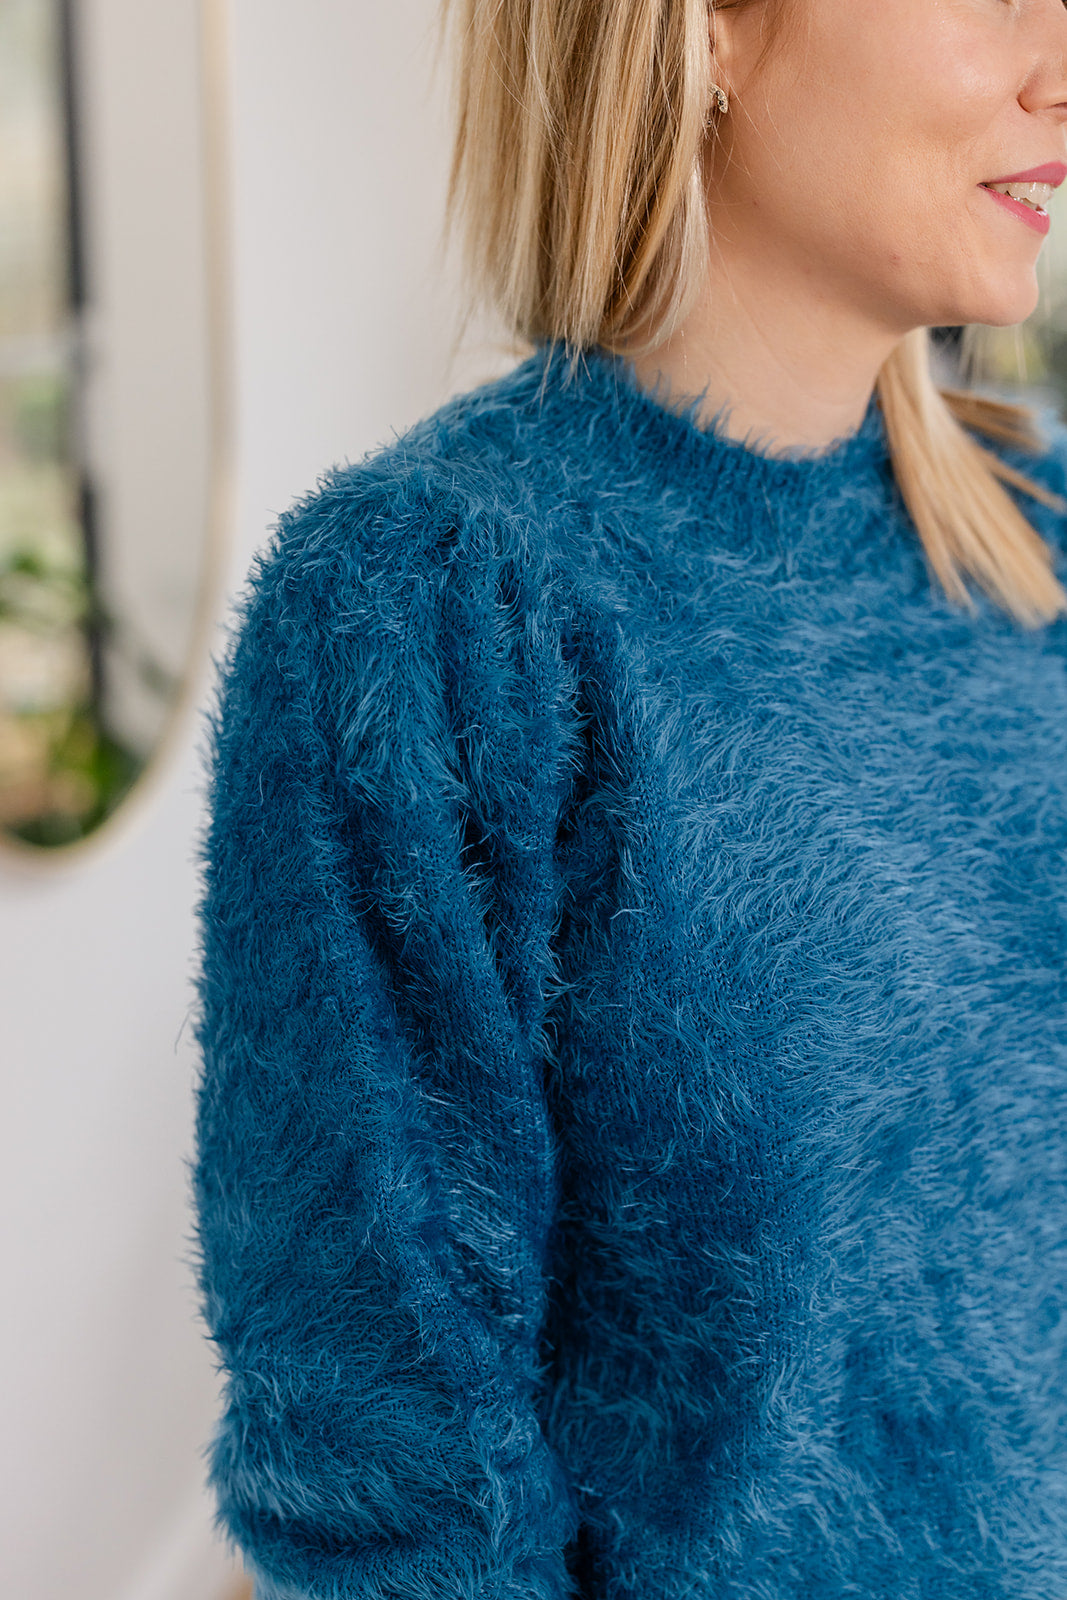 Fqmousy pullover - Saxony Blue